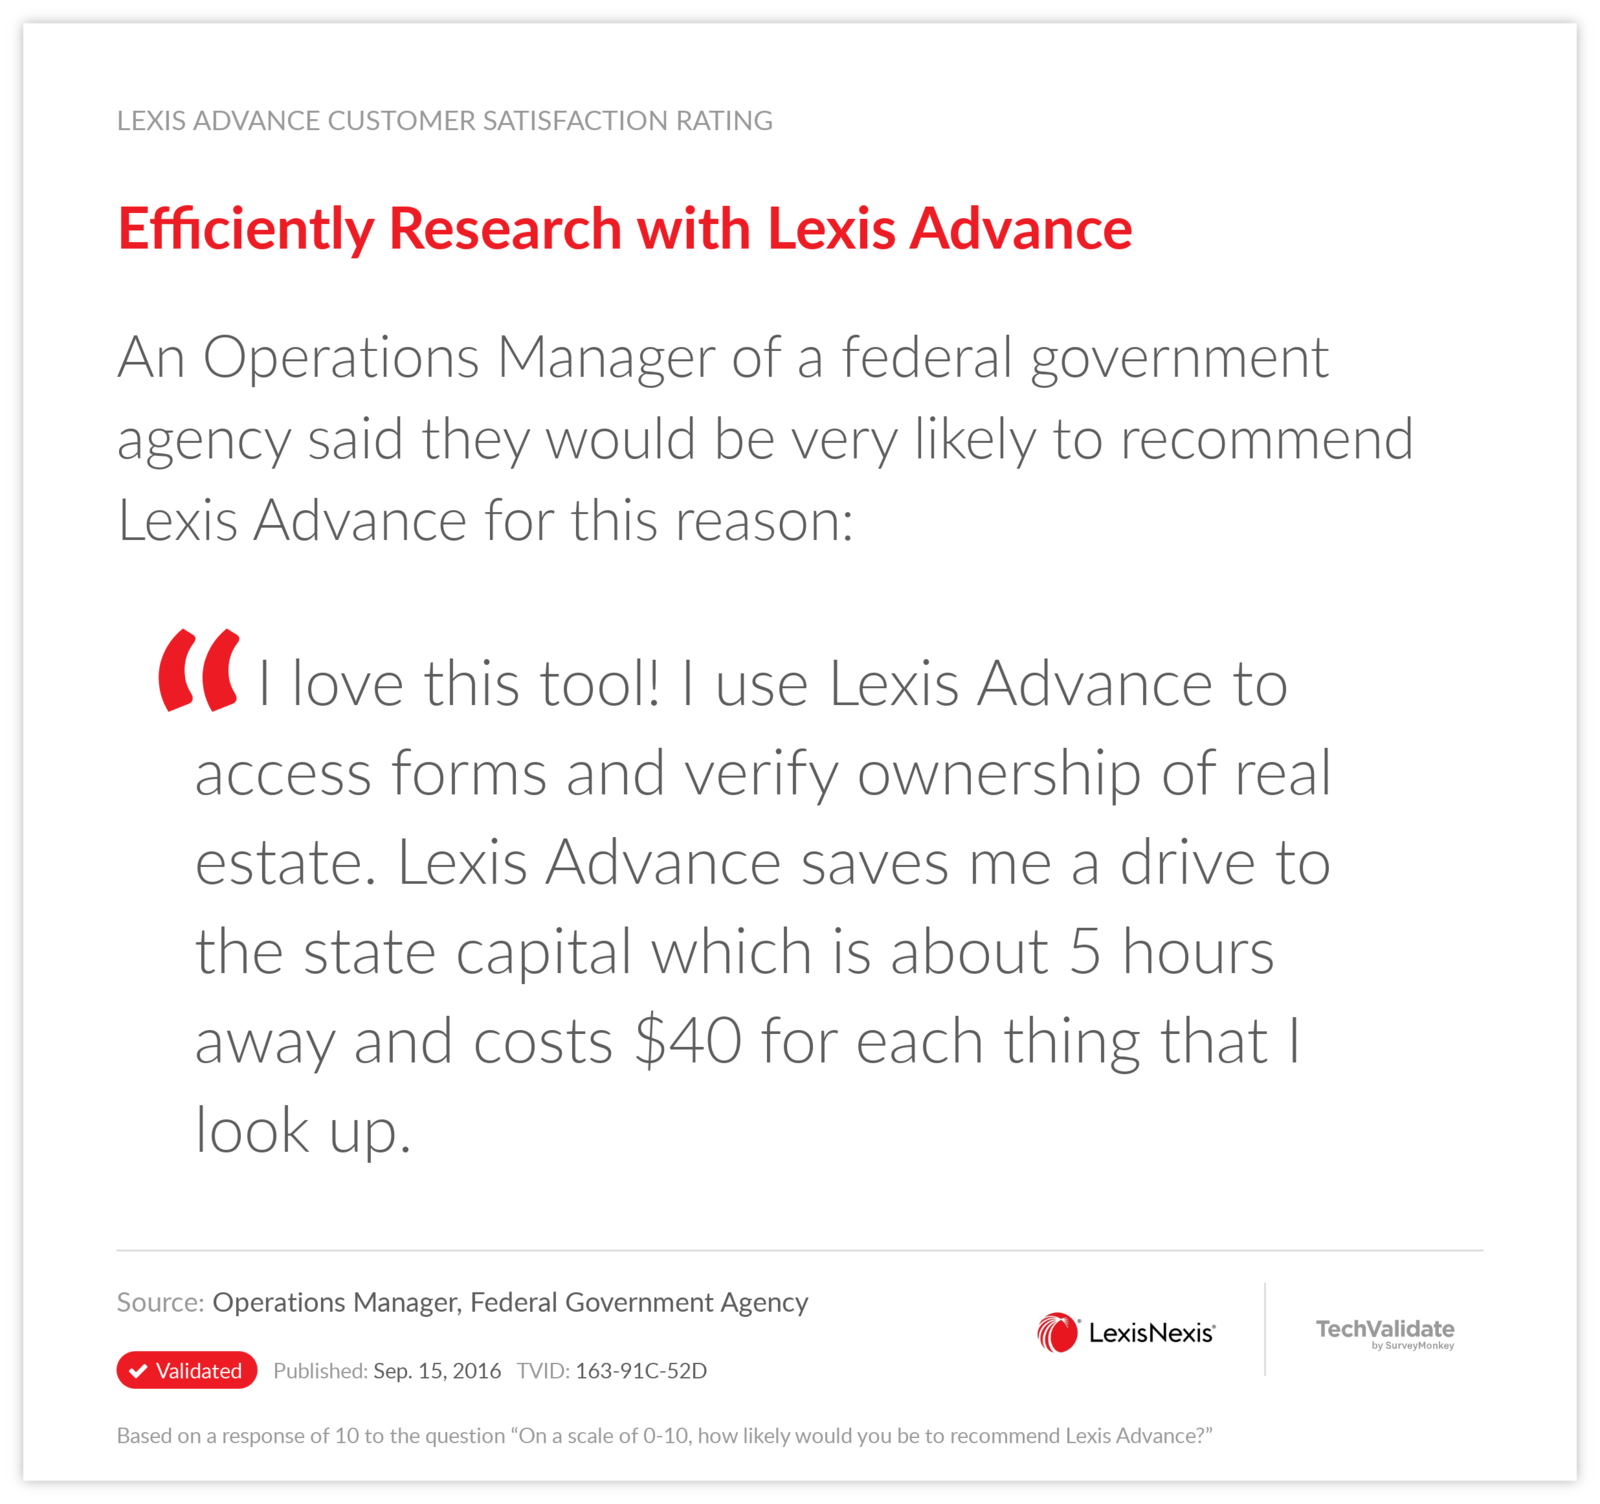 Efficiently Research with Lexis Advance